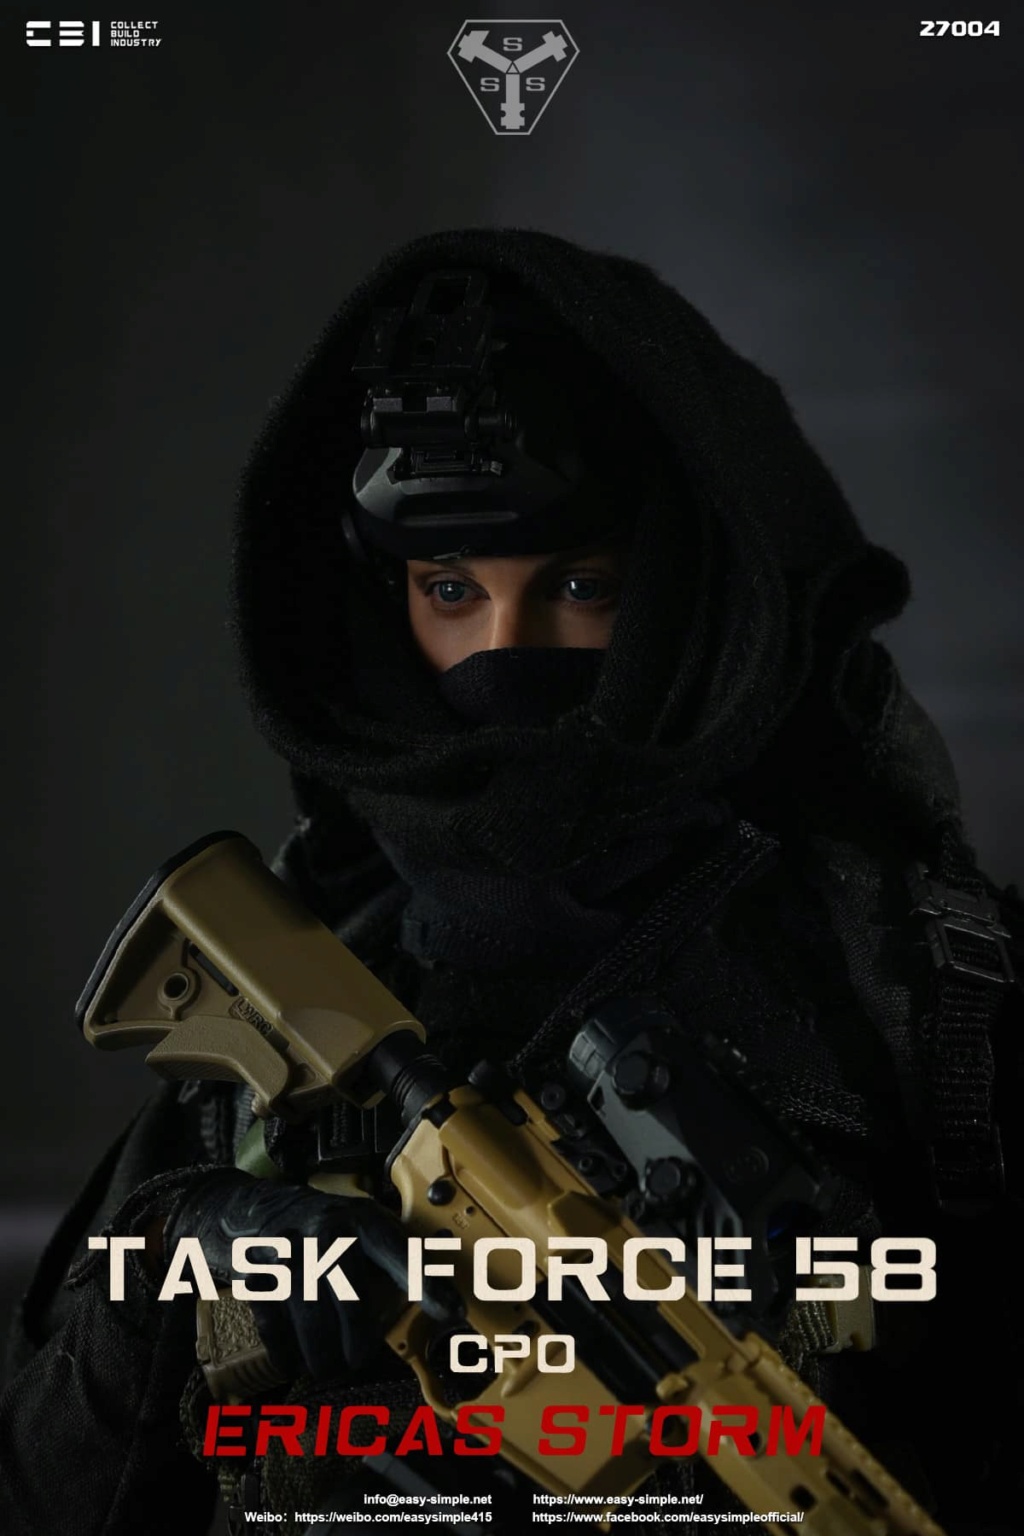 comicbook - NEW PRODUCT: CBI & Easy&Simple: 27004 1/6 ERICA STORM - TASK FORCE 58 CPO action figure 18294